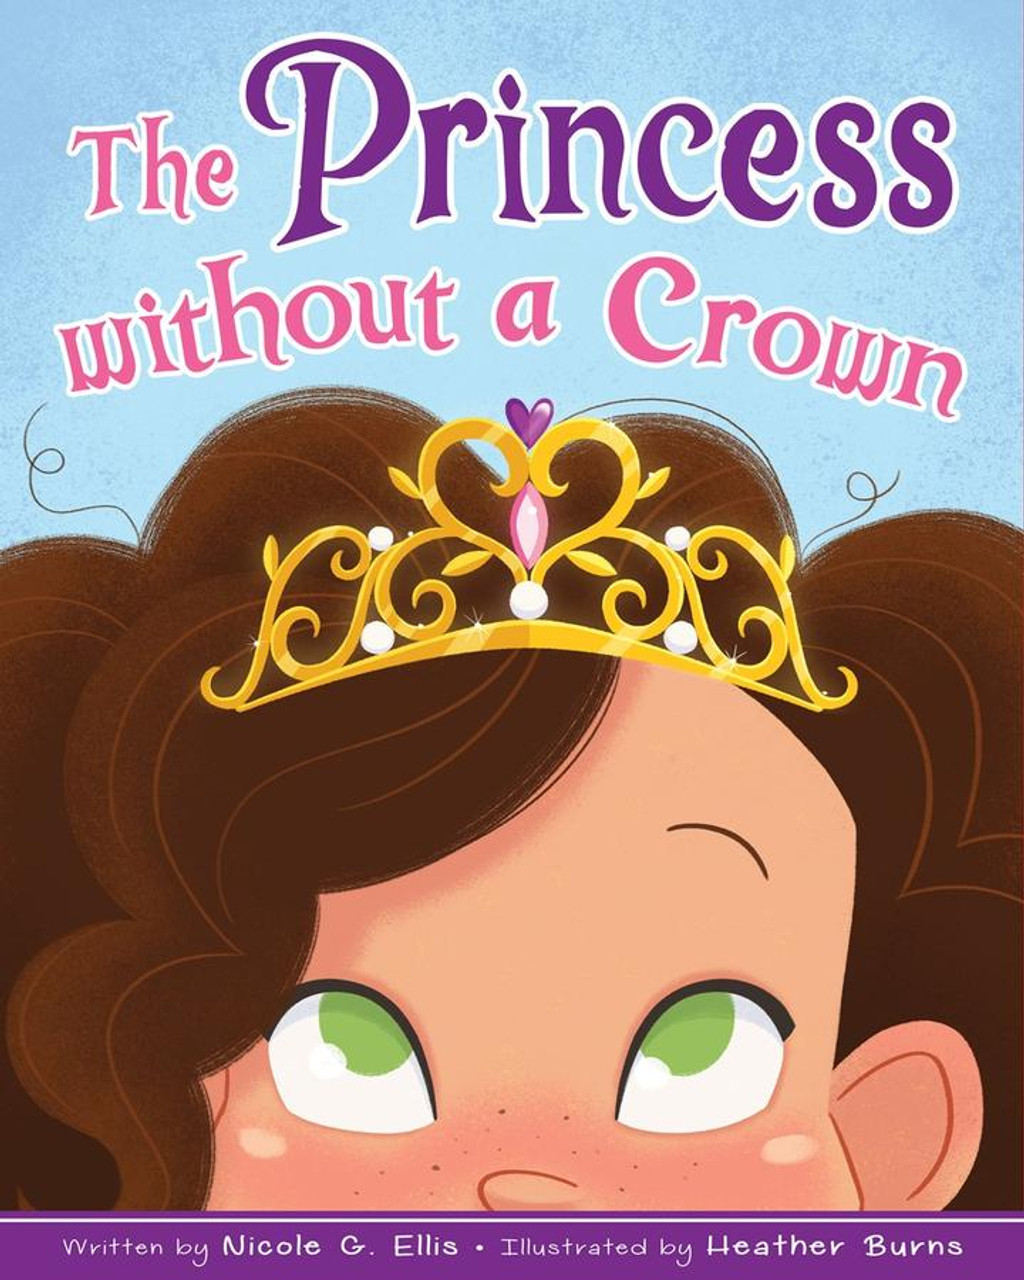 The Princess Without a Crown(Hardcover)